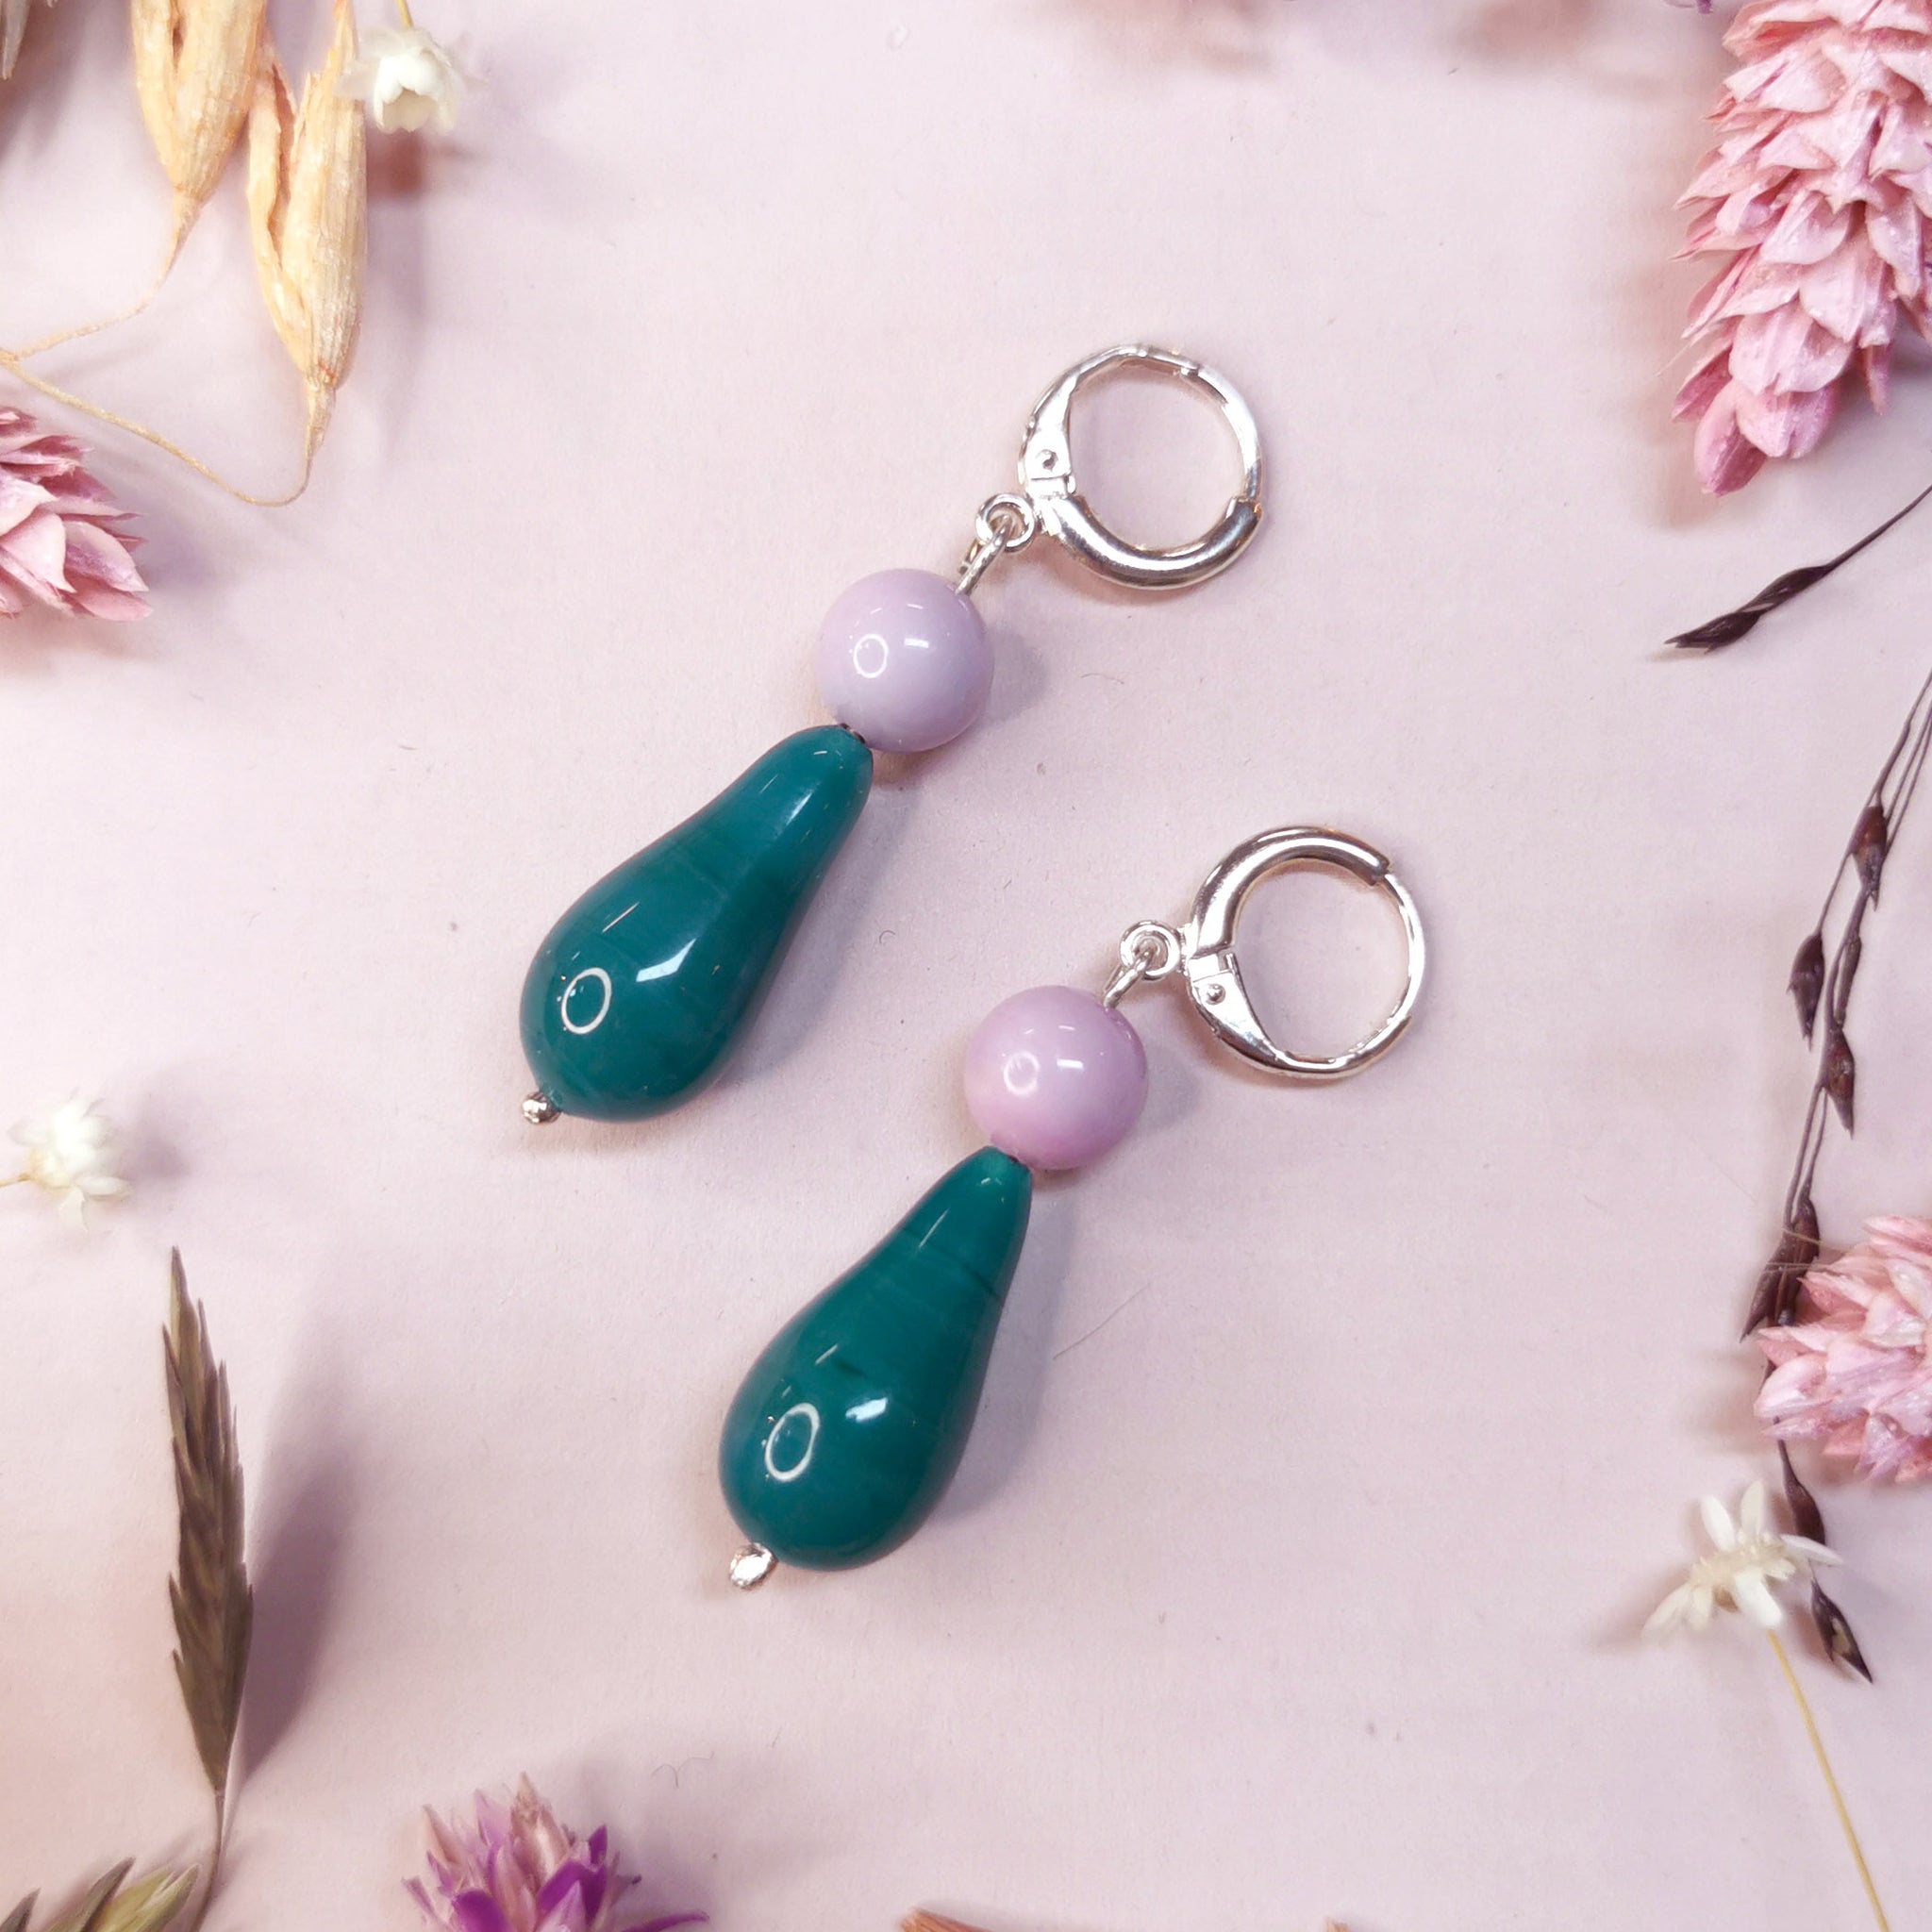 LaLa earrings, Light lavender and Turquoise